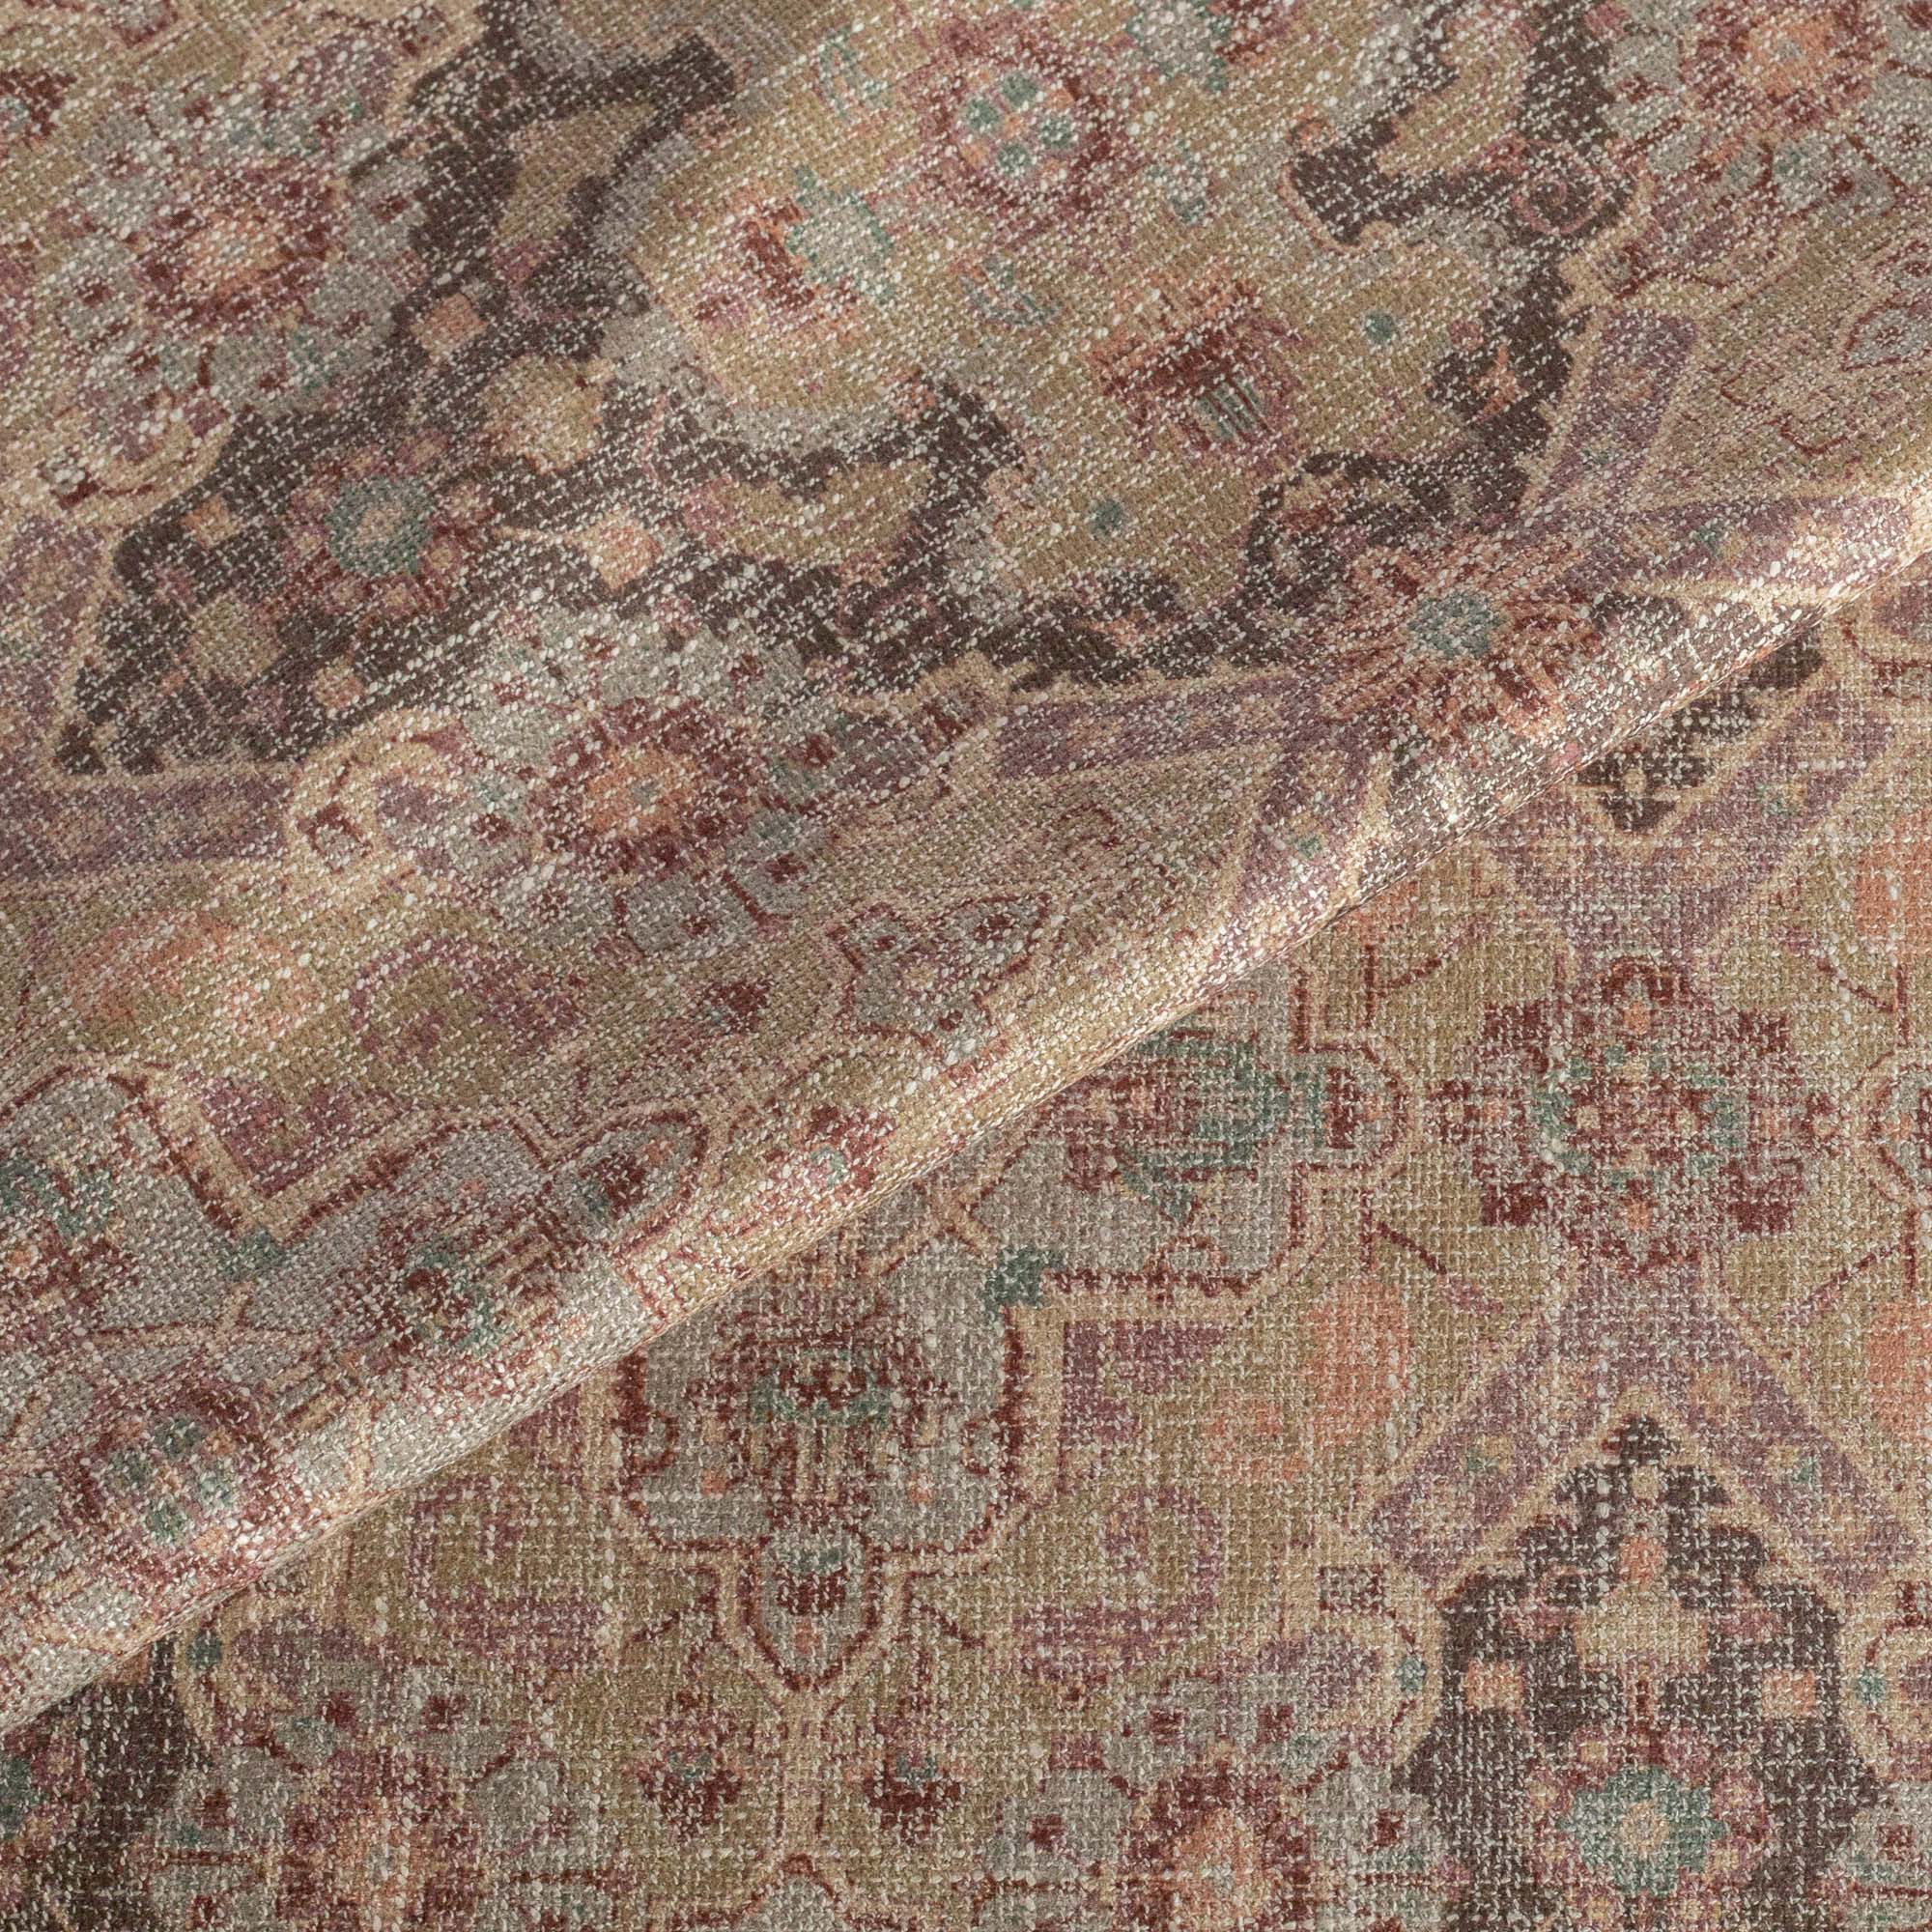 Serafina : a plum, blush pink, tan and brown vintage medallion tapestry print upholstery fabric : view 3